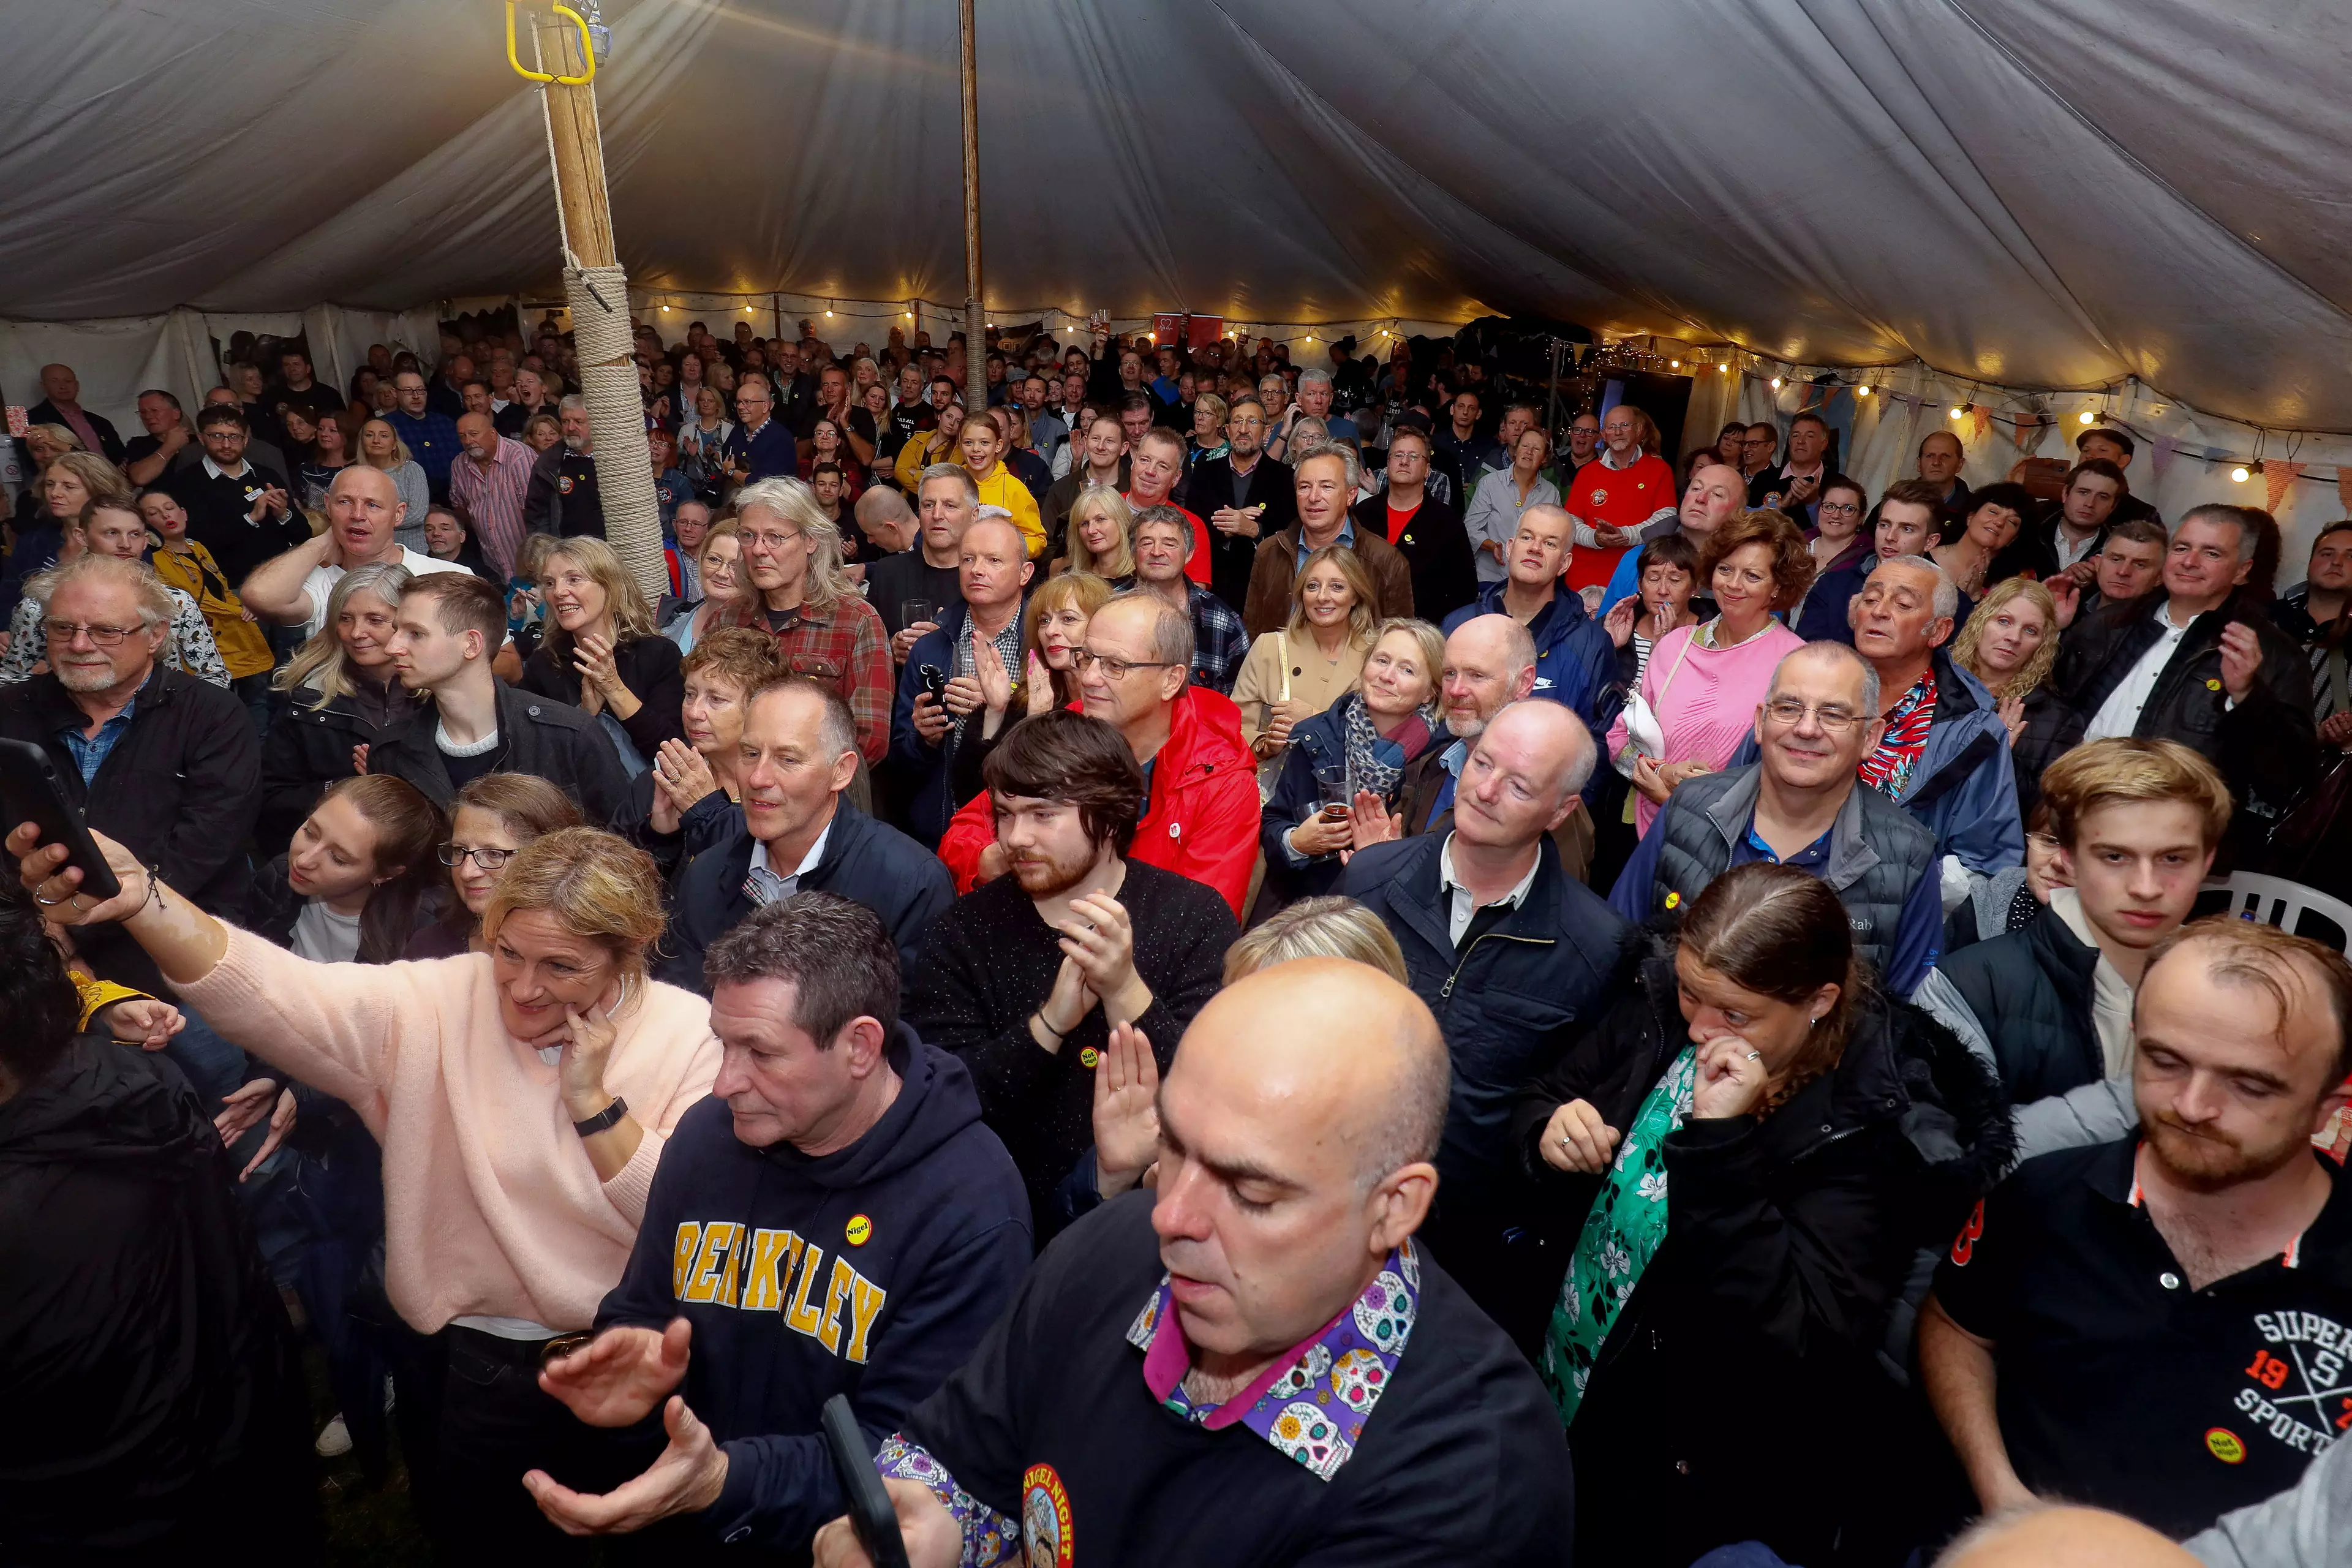 More than 430 Nigels gathered in a pub for a world record attempt.